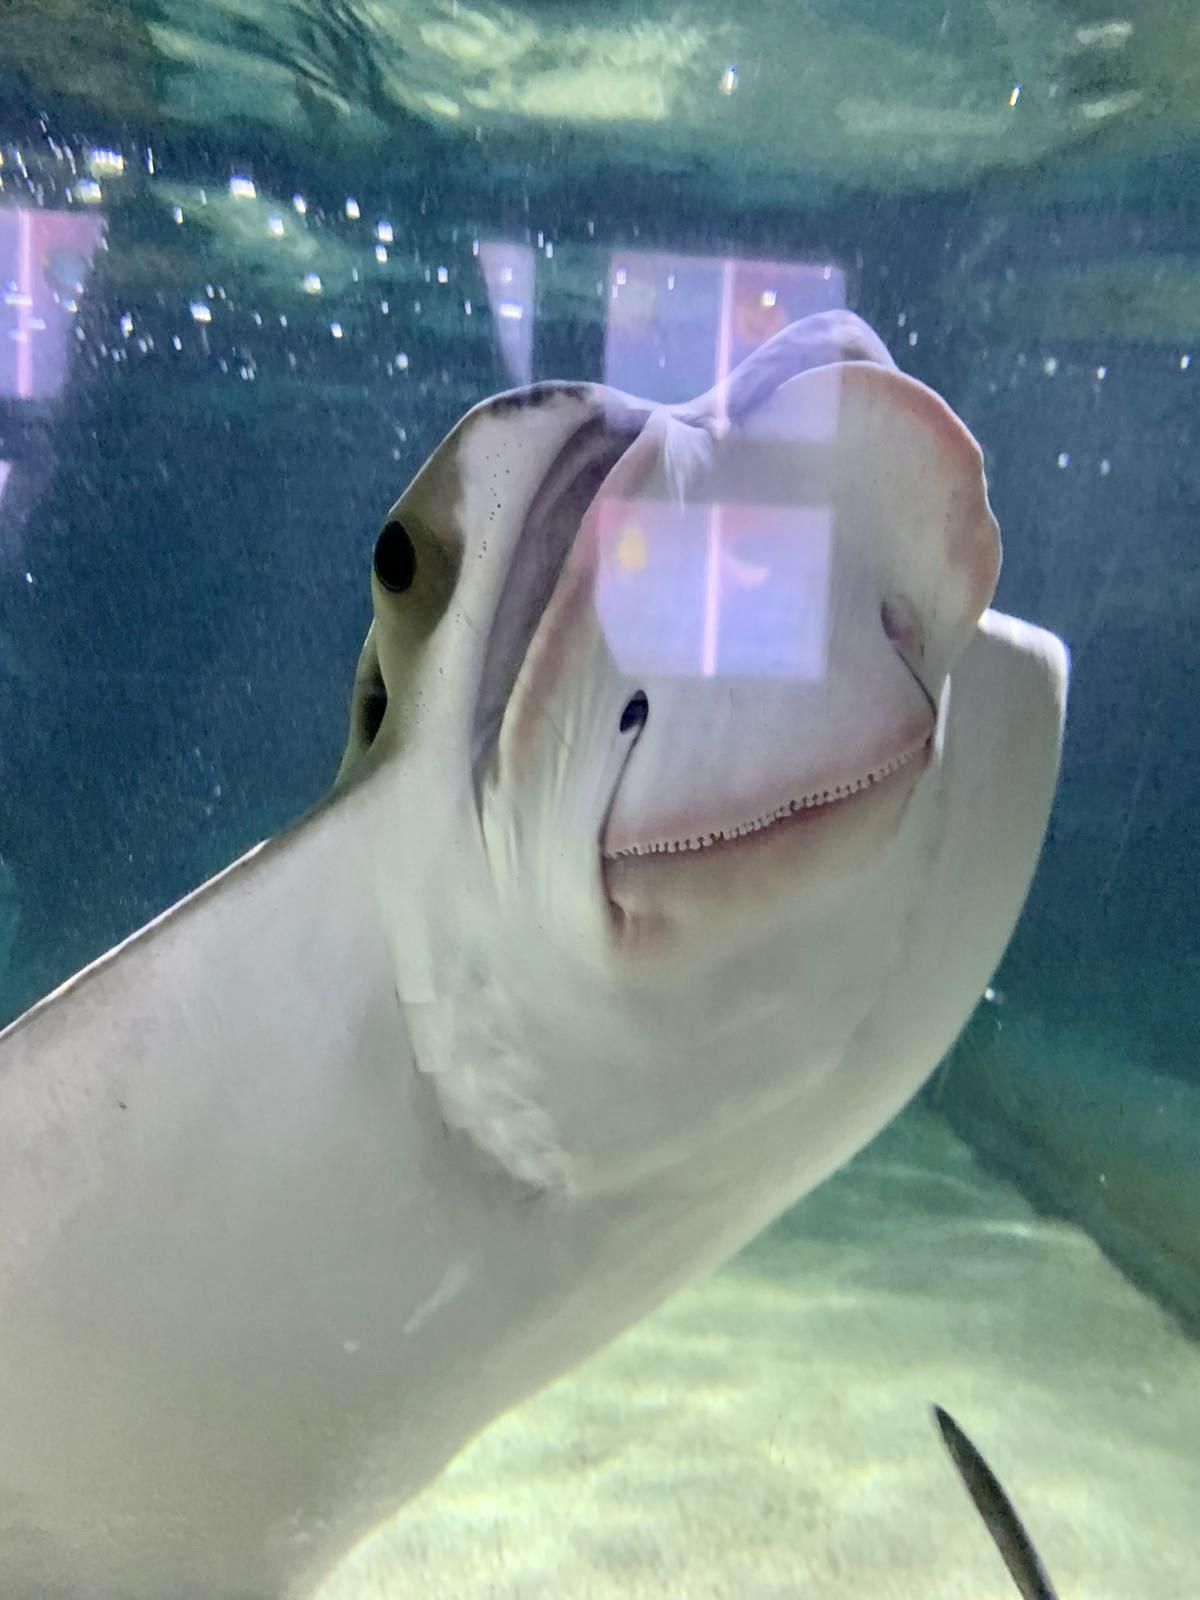 Just a stingray showing off his fabulous teeth